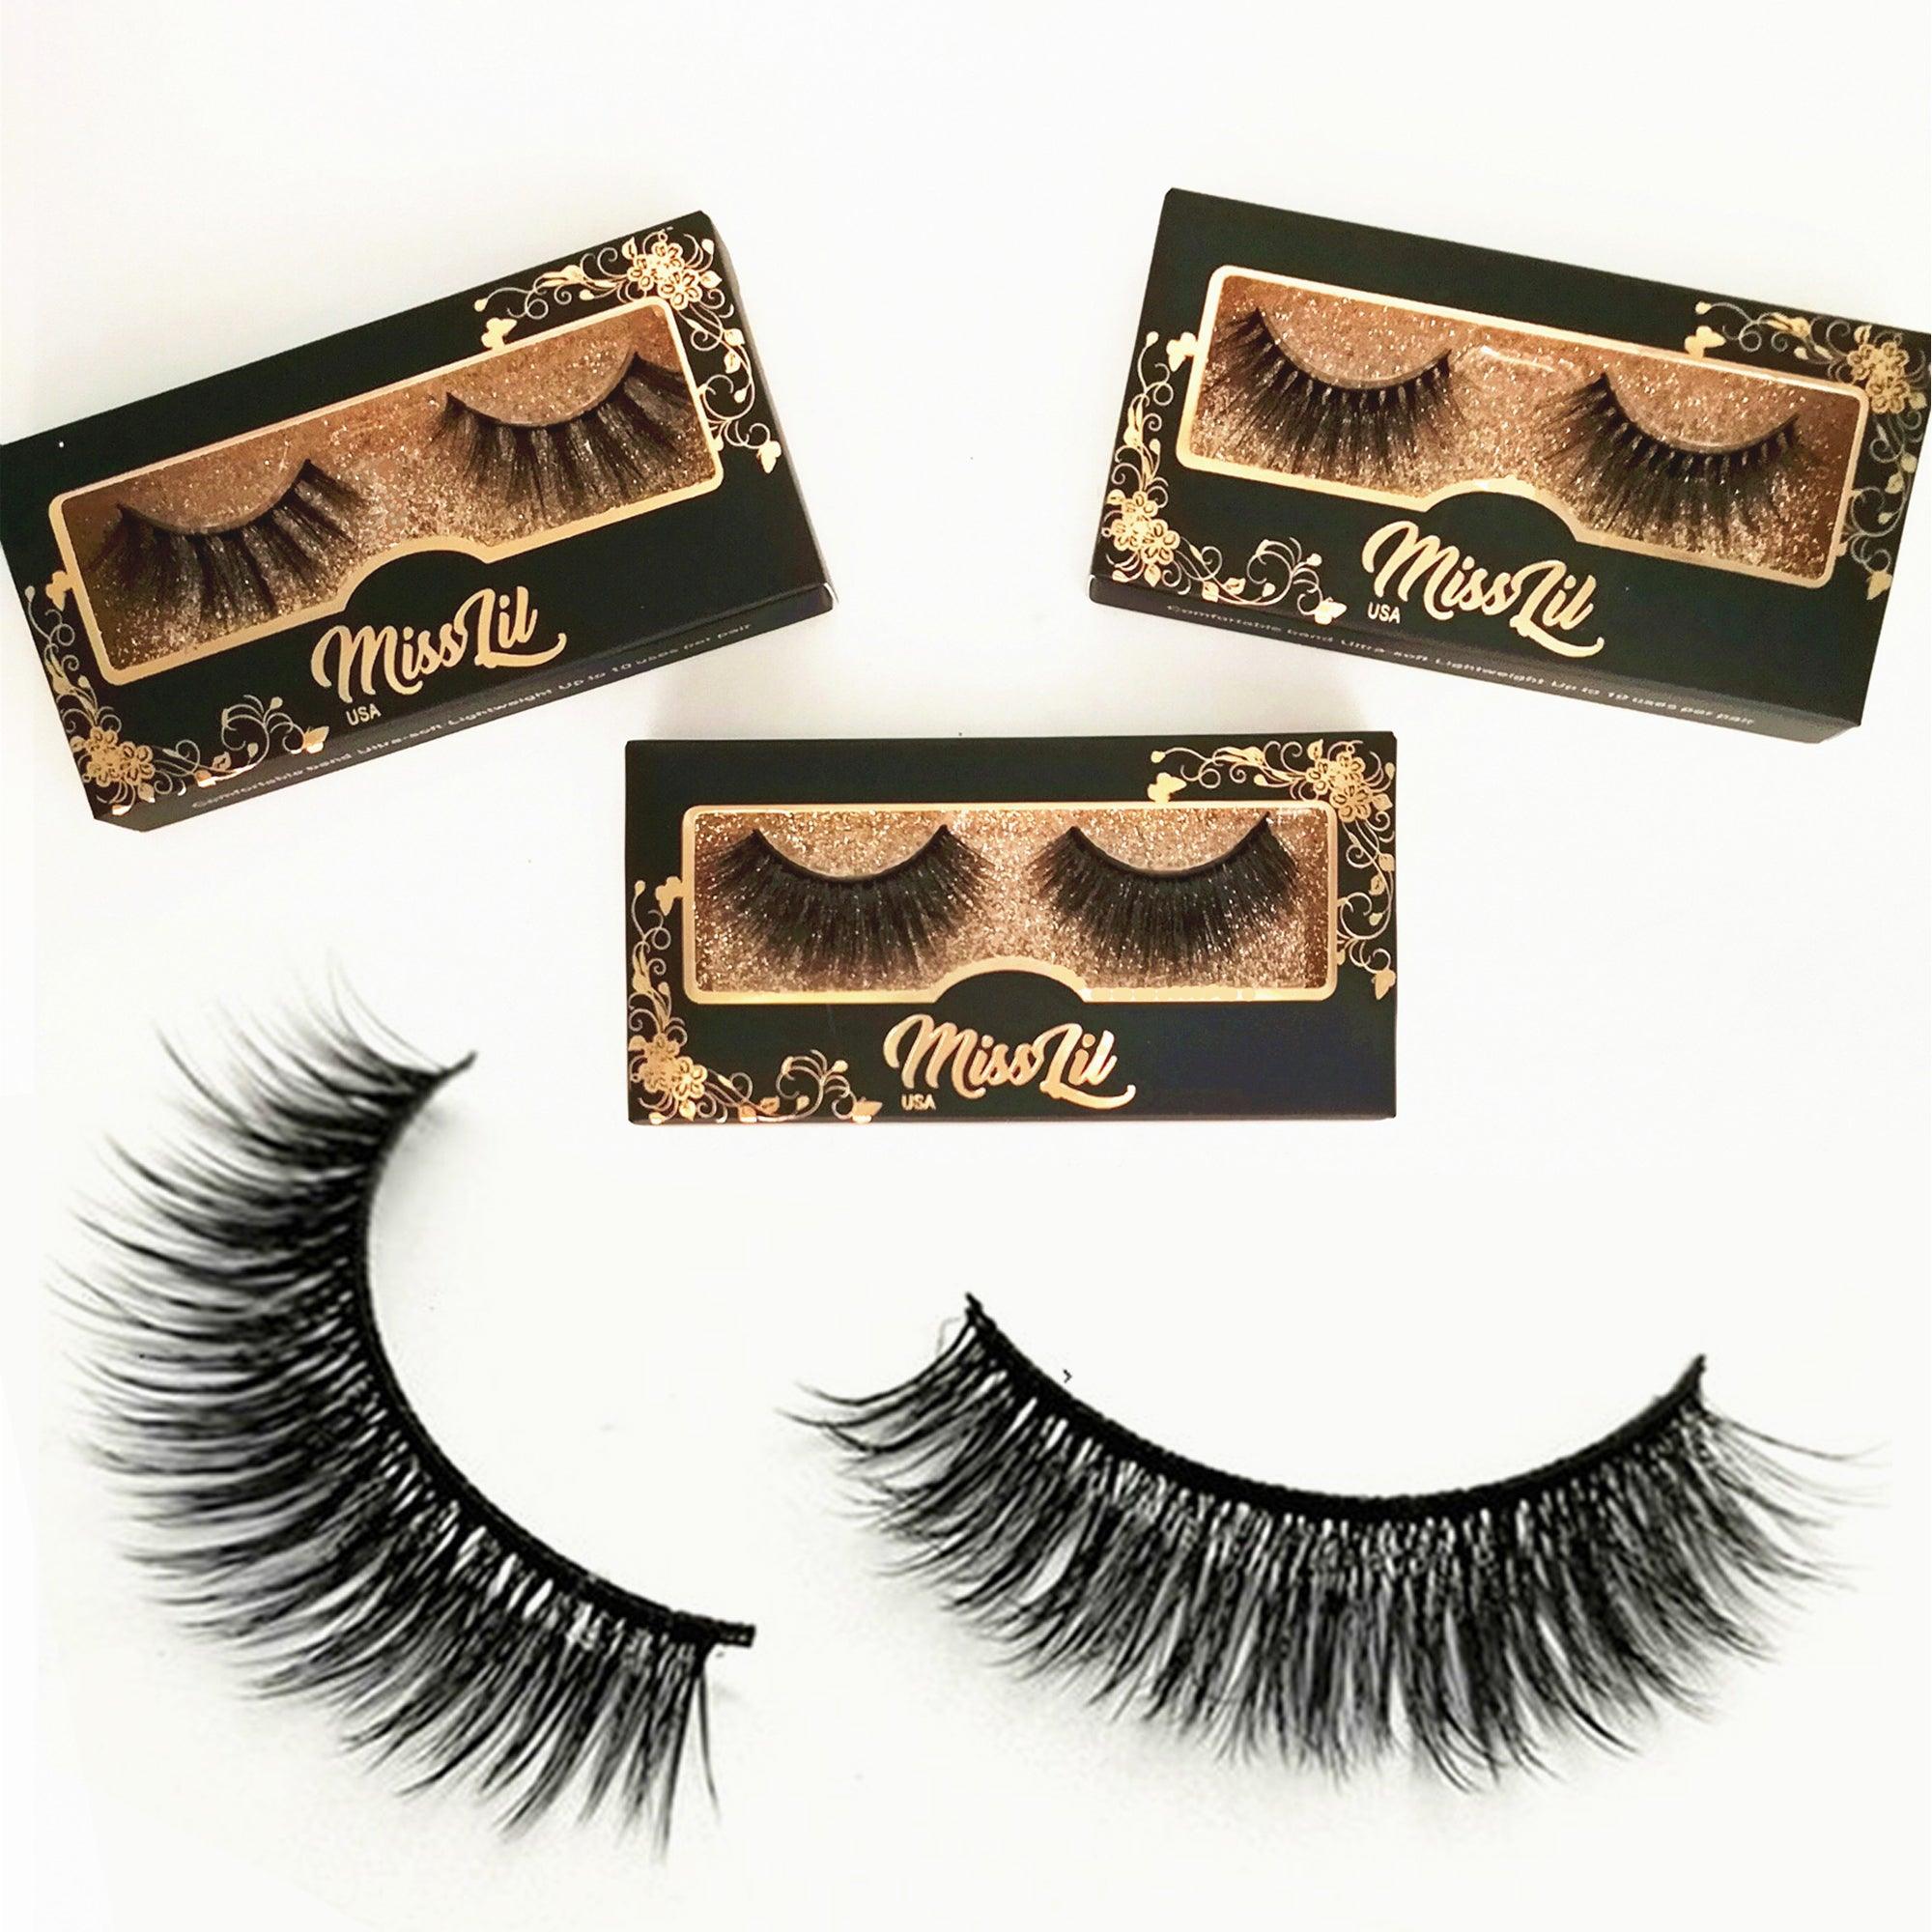 1-Pair Miss Lil USA Lashes #40 (Pack of 12) - Miss Lil USA Wholesale